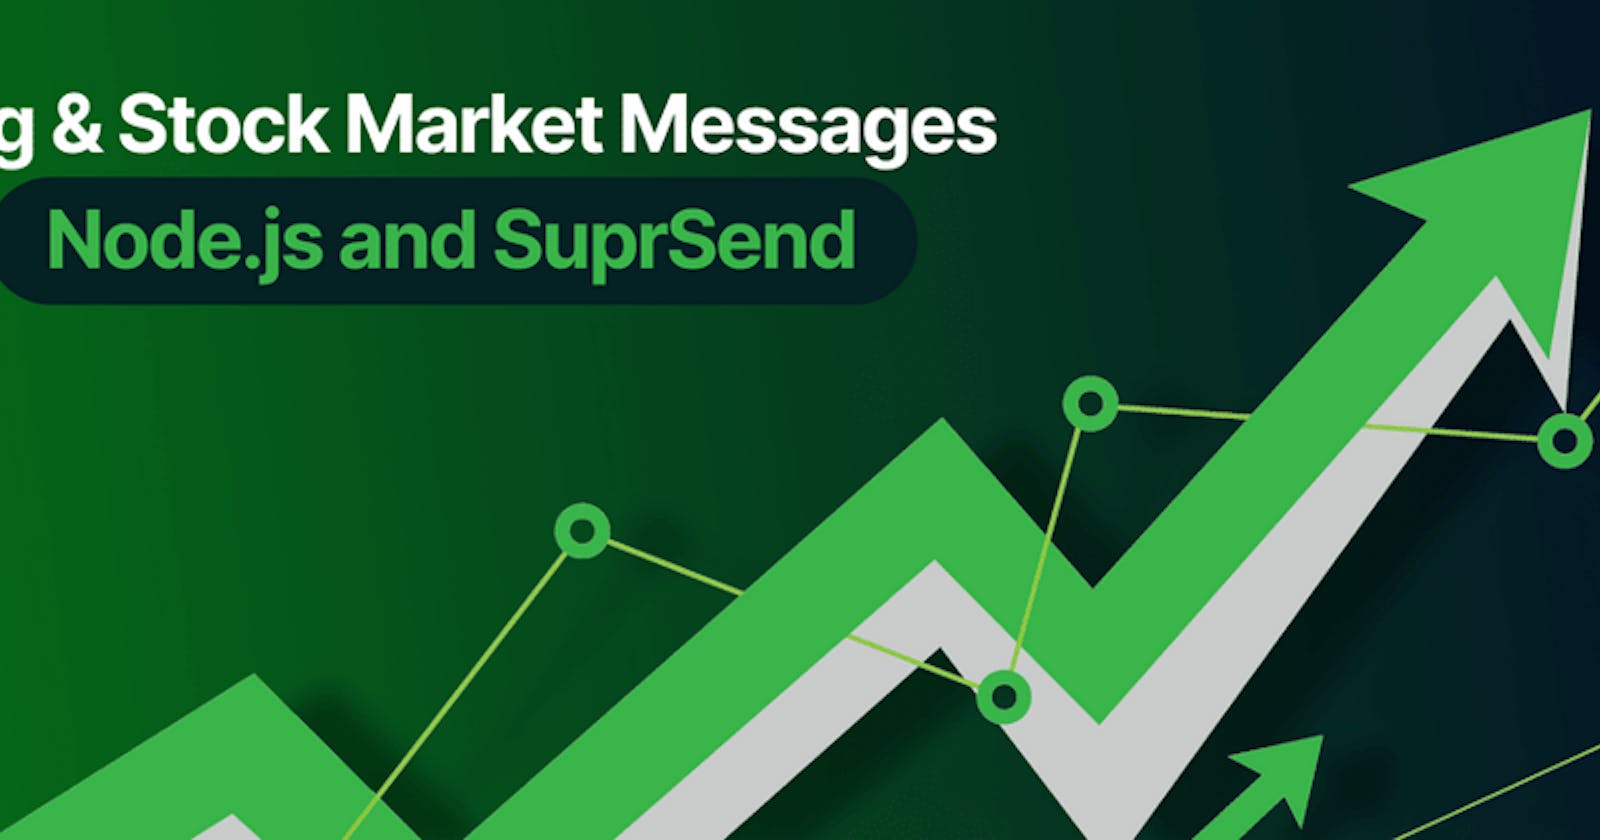 Broadcast Trading & Stock Market Messages to Multiple Users at Fixed Times | Using Node.js and SuprSend